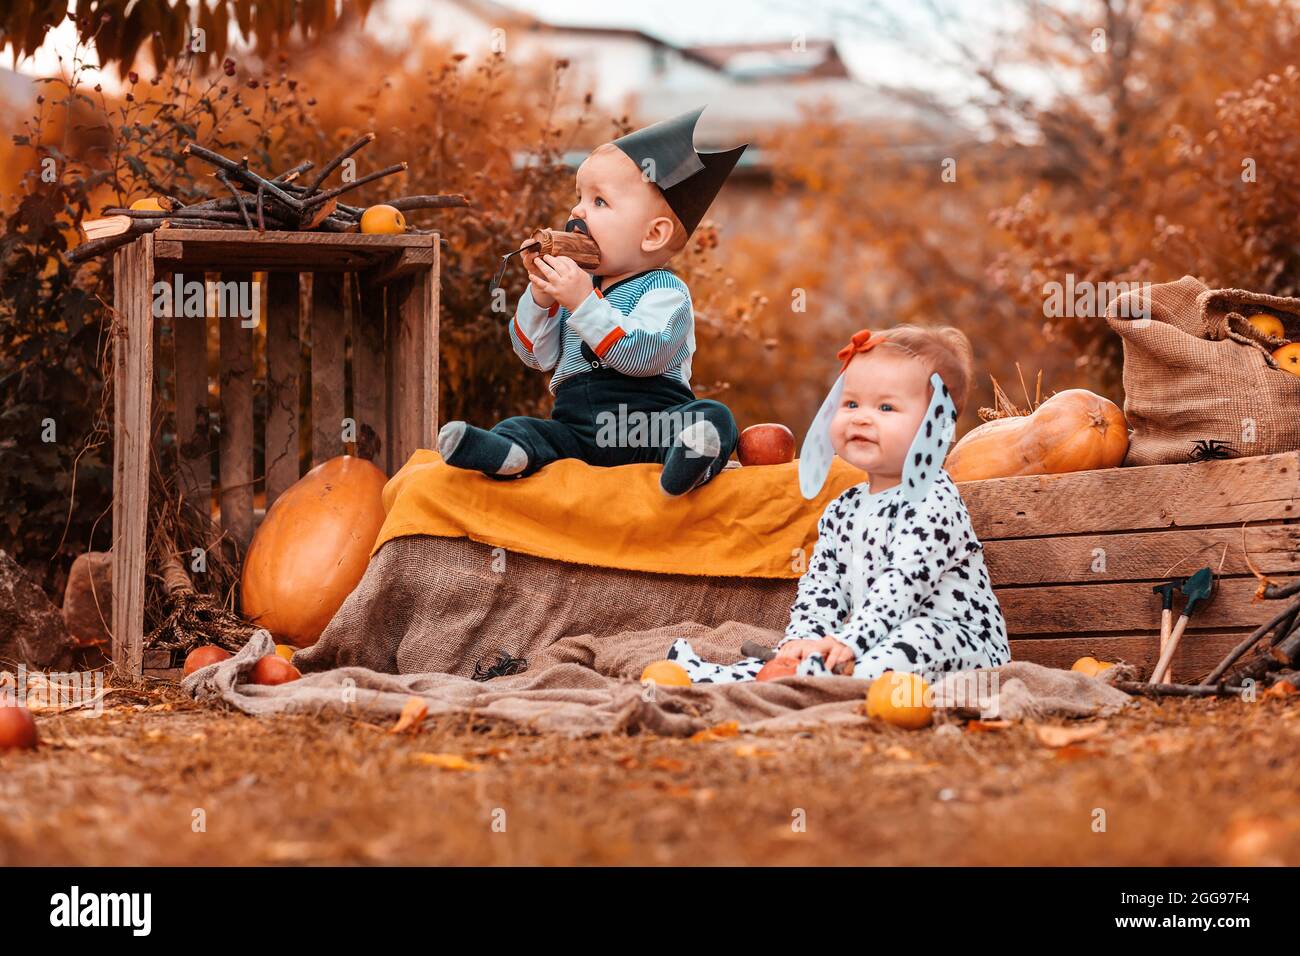 Halloween holiday. A boy in a pirate costume and a funny girl in a  Dalmatian costume, surrounded by pumpkins and agricultural decor. Preschool  childre Stock Photo - Alamy